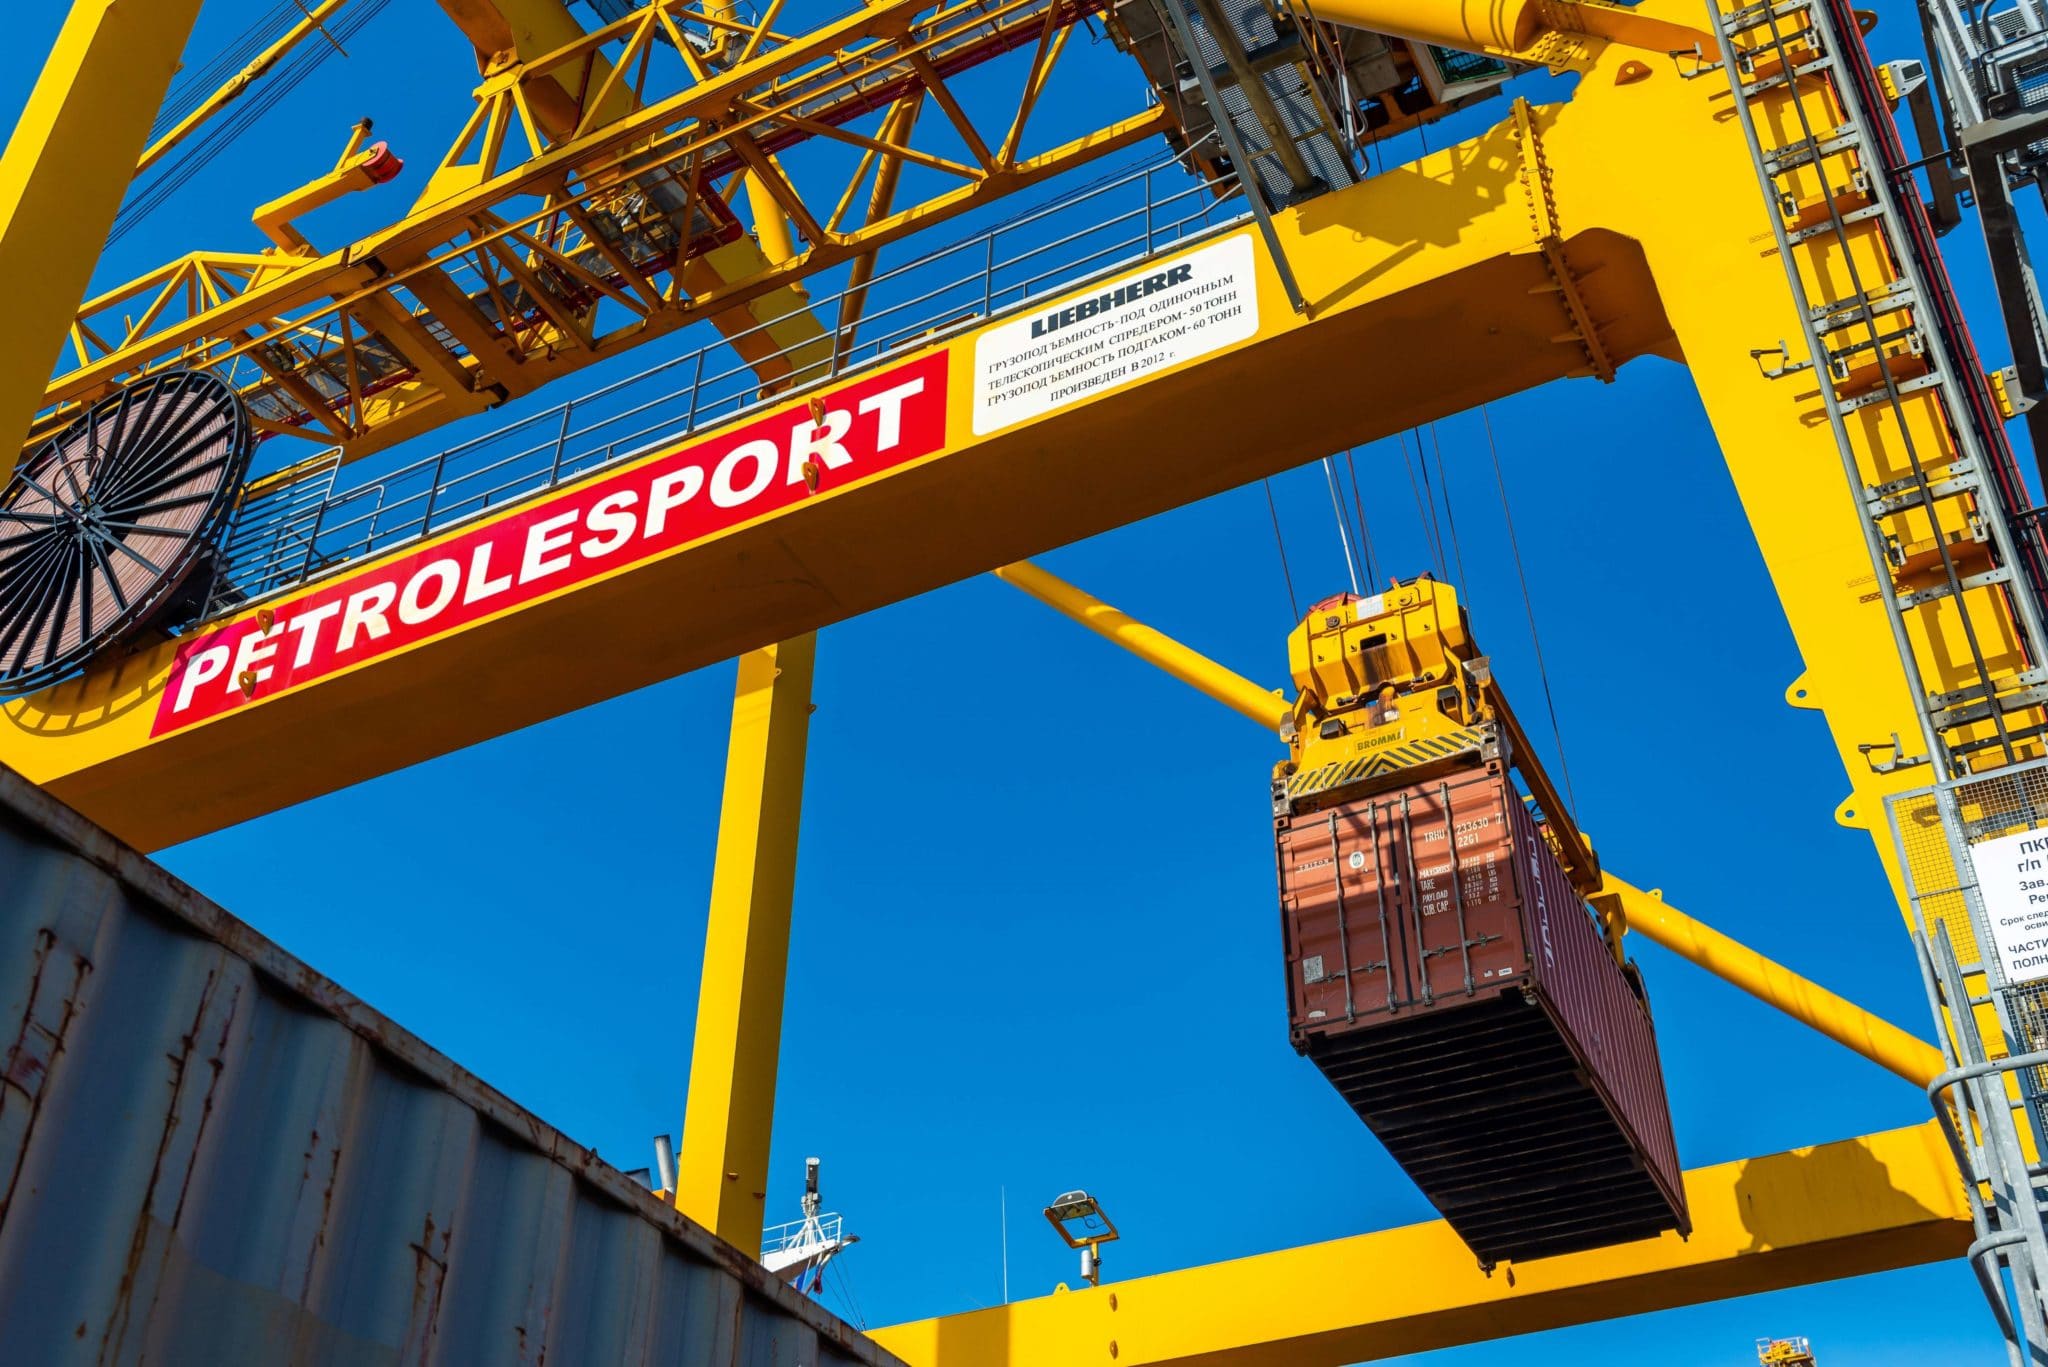 Global Ports Investments PLC has announced two changes to the board of directors changes